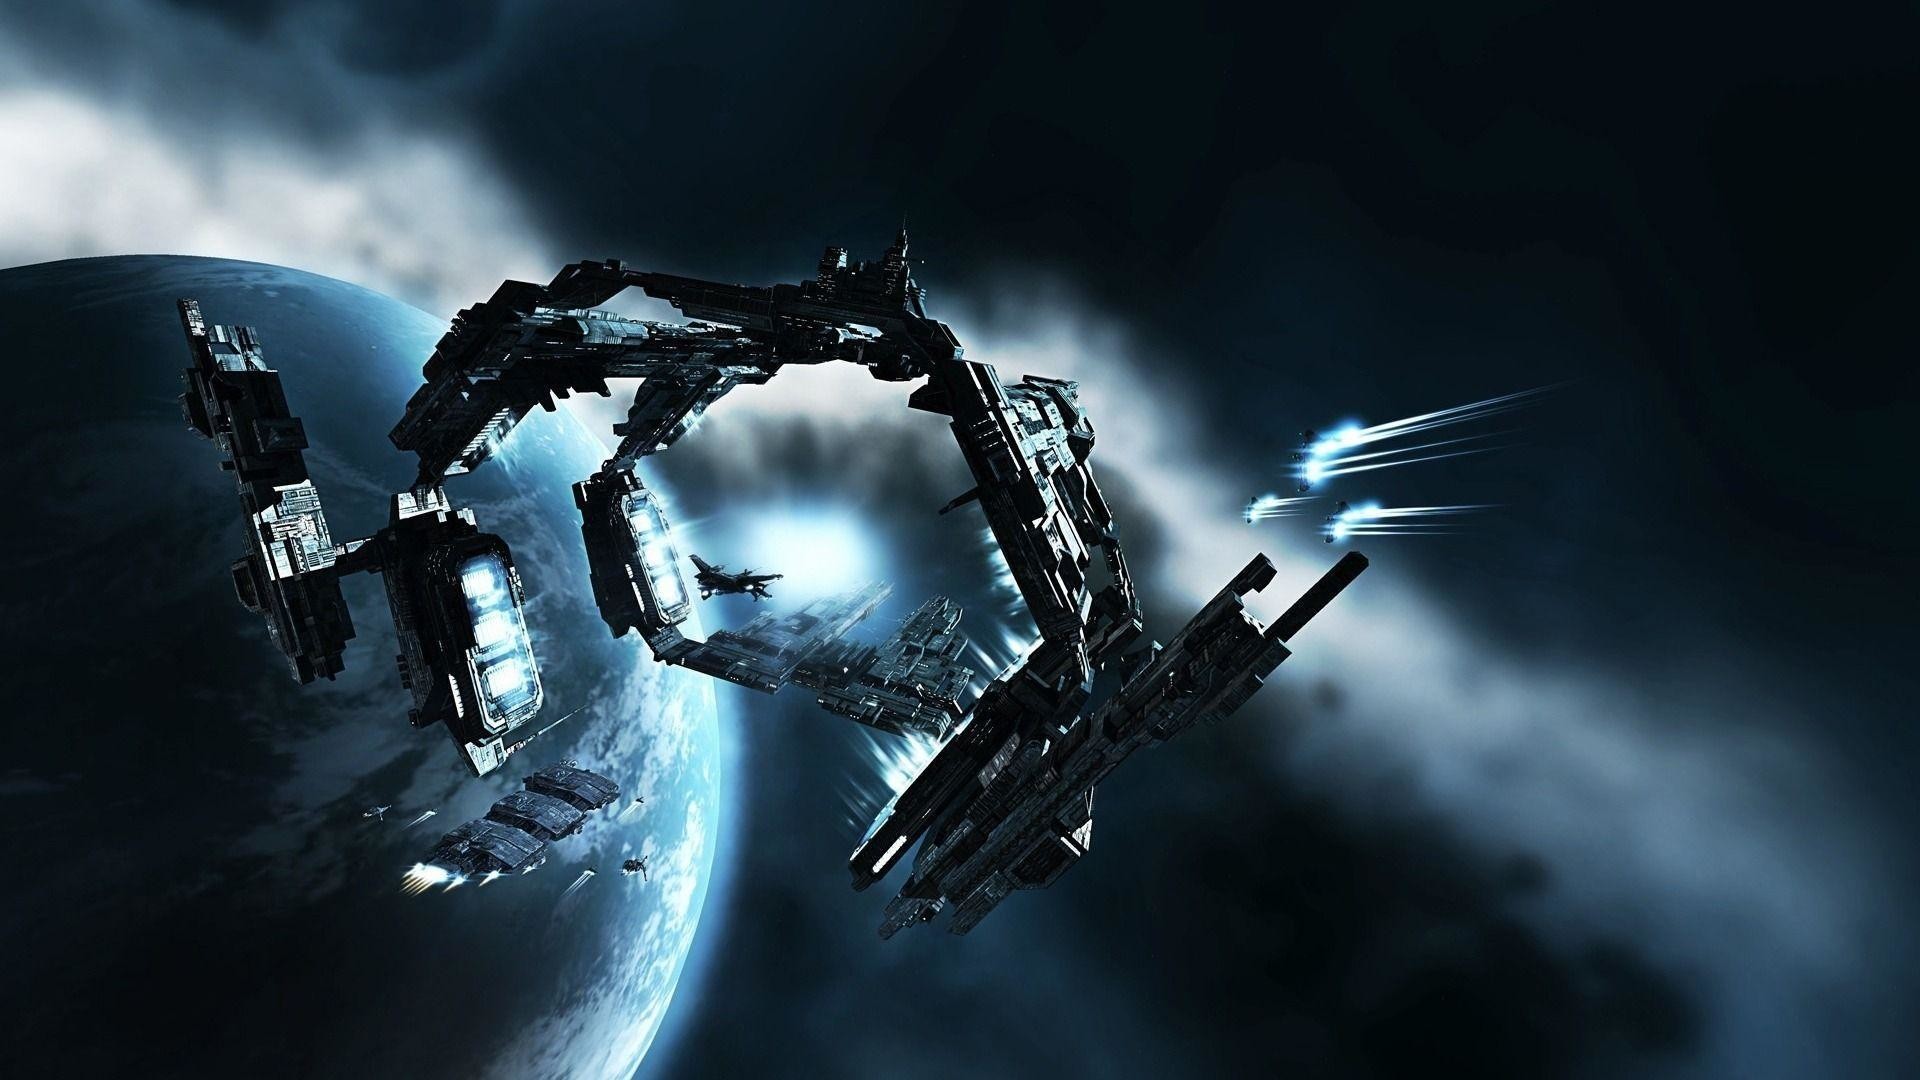 1920x1080 158 Eve Online Wallpapers | Eve Online Backgrounds Page 2